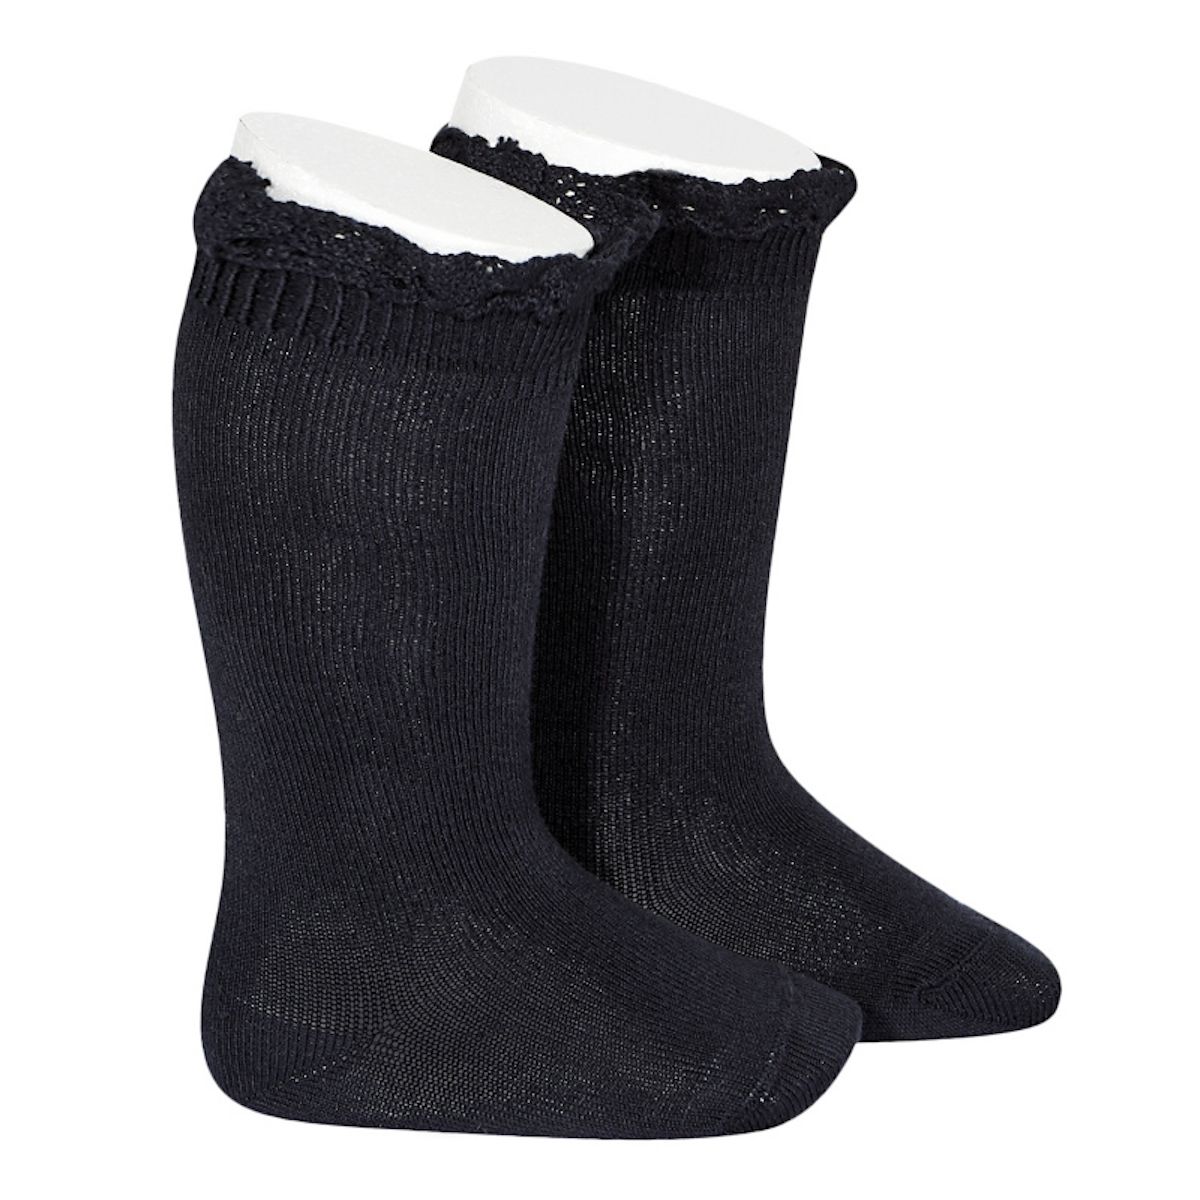 Condor Knee Socks With Lace navy blue 2.409/2_480 